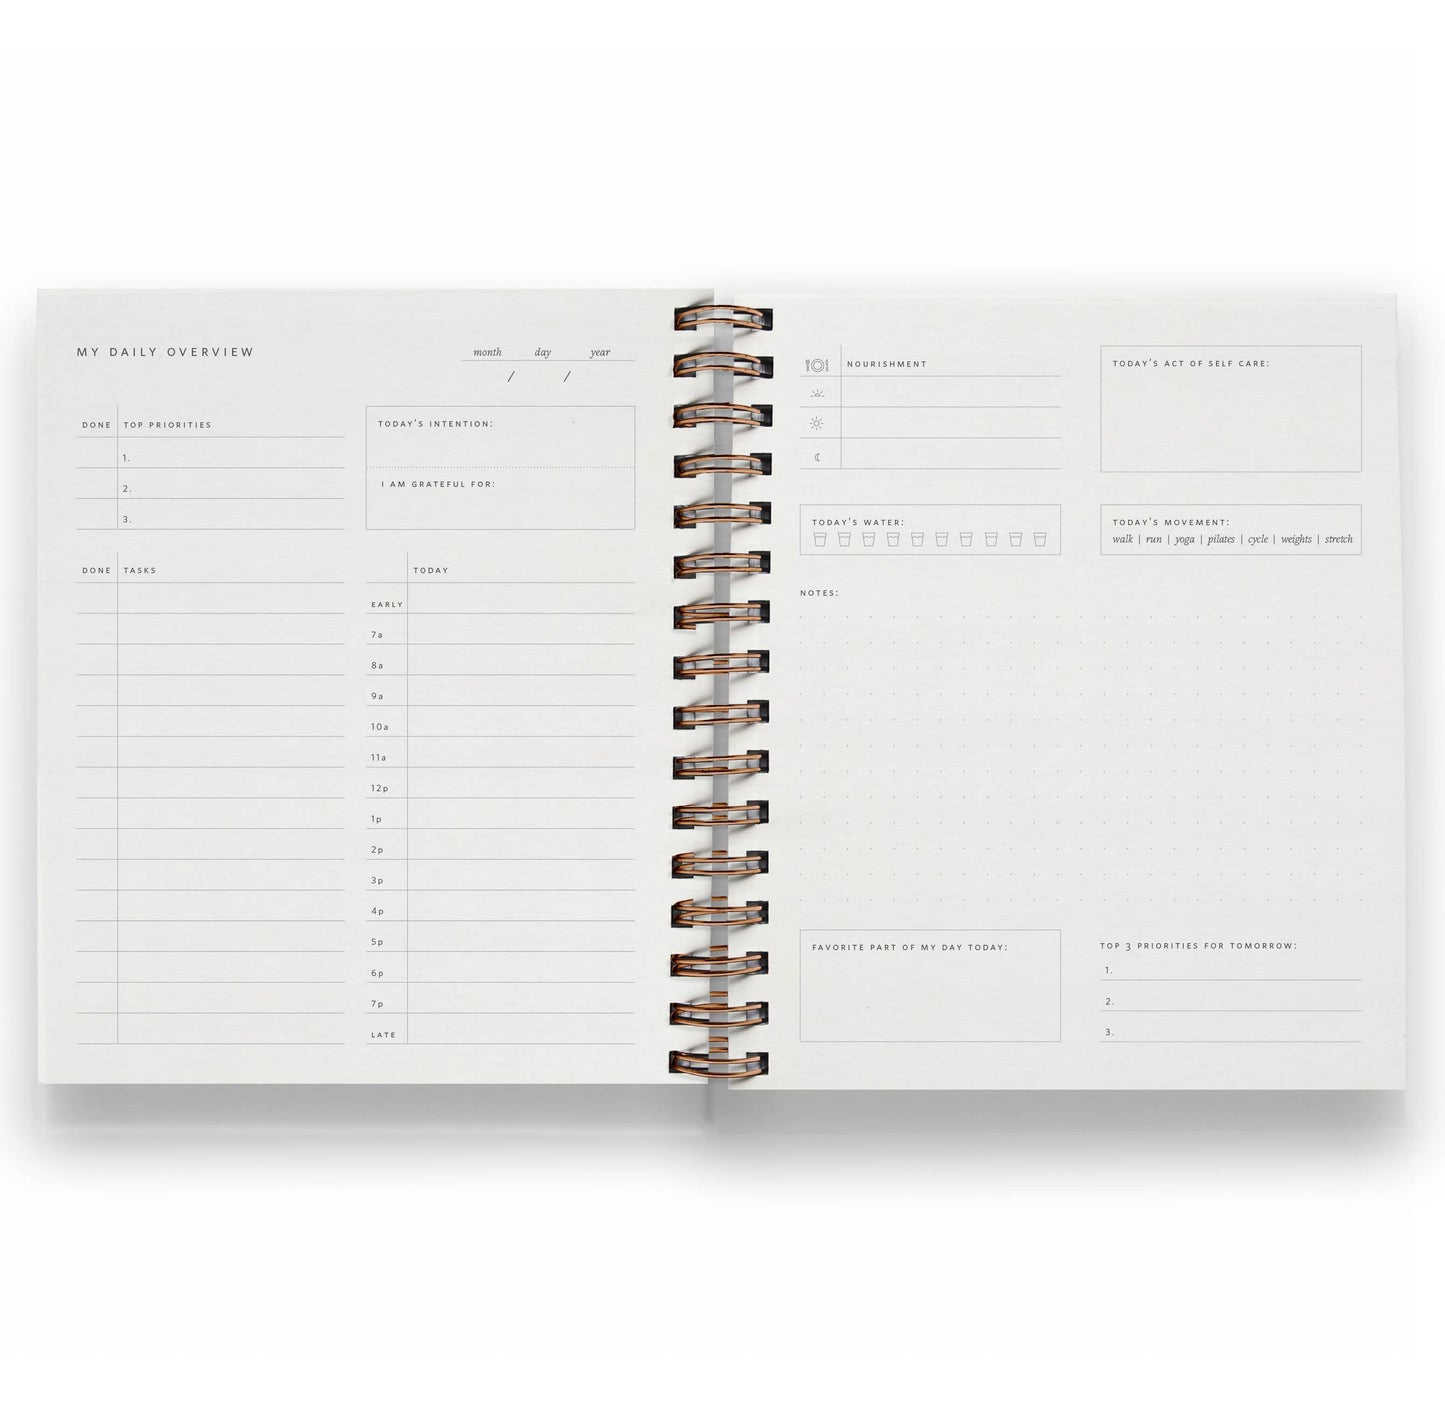 Daily Overview Planner in Steel Blue by Ramona & Ruth